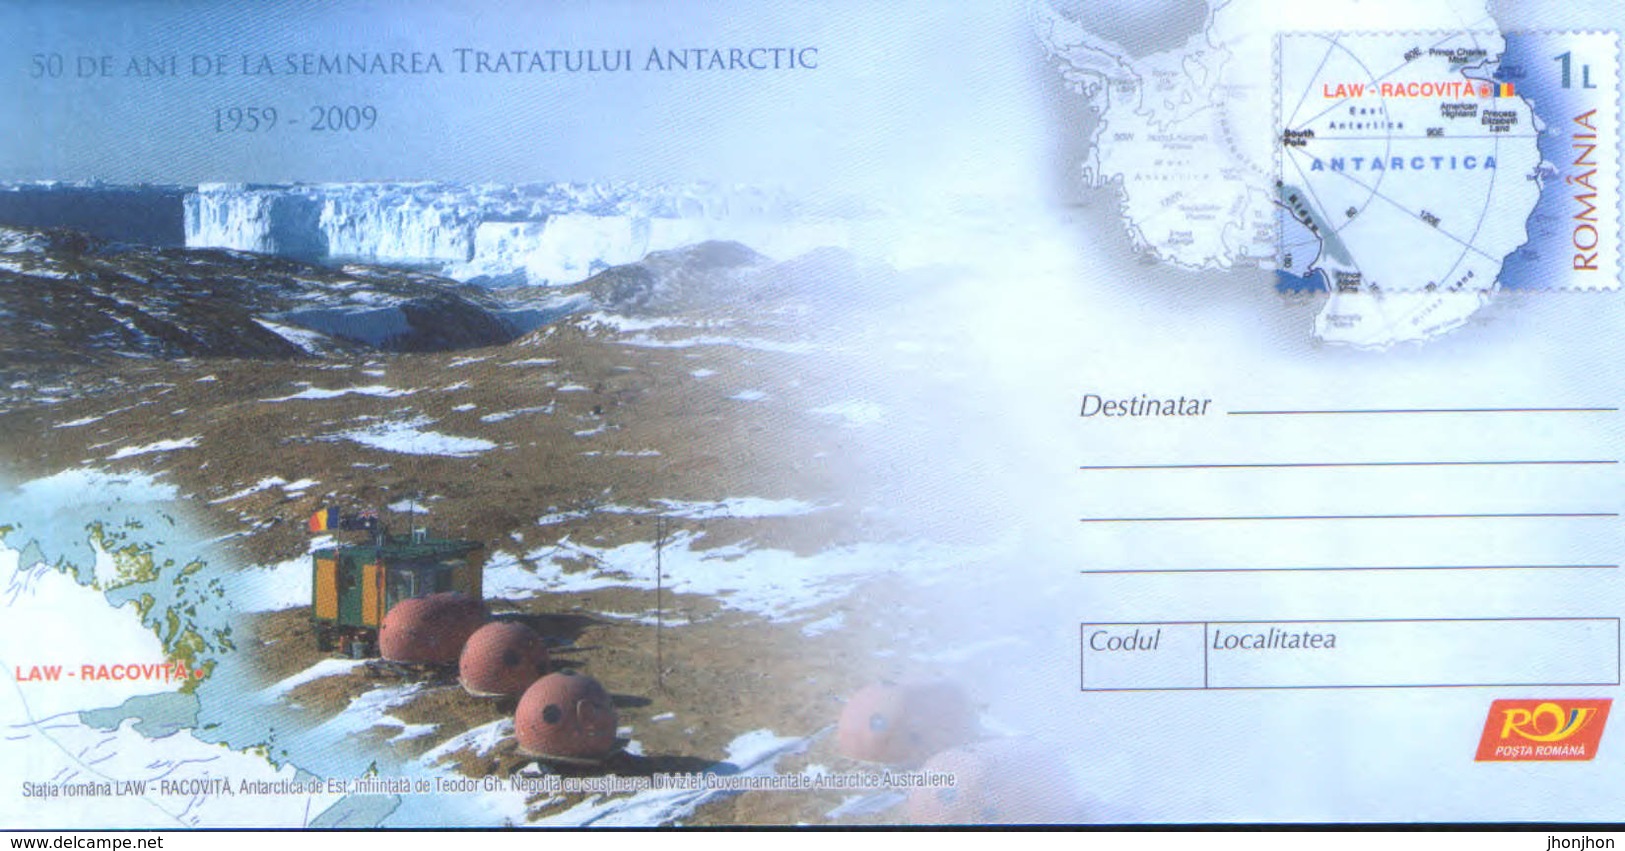 Romania - Stationery Cover Unused 2009(003) - 50 Years Since The Signing Of The Antarctic Treaty, 1959 - 2009 - Antarktisvertrag